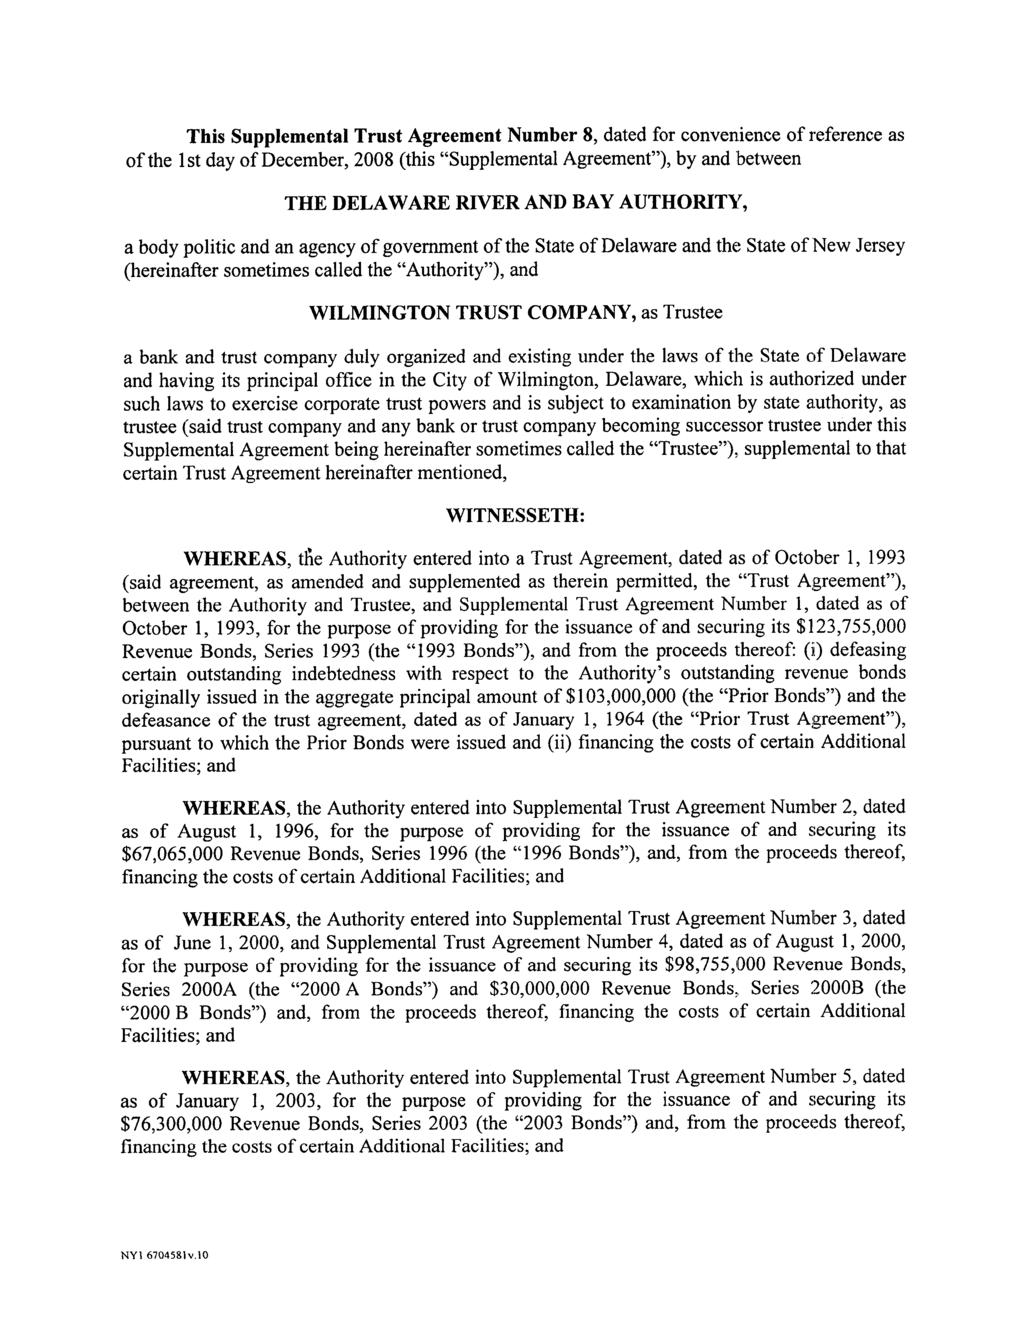 This Supplemental Trust Agreement Number 8, dated for convenience of reference as of the 1st day of December, 2008 (this "Supplemental Agreement"), by and between THE DELAWARE RIVER AND BAY